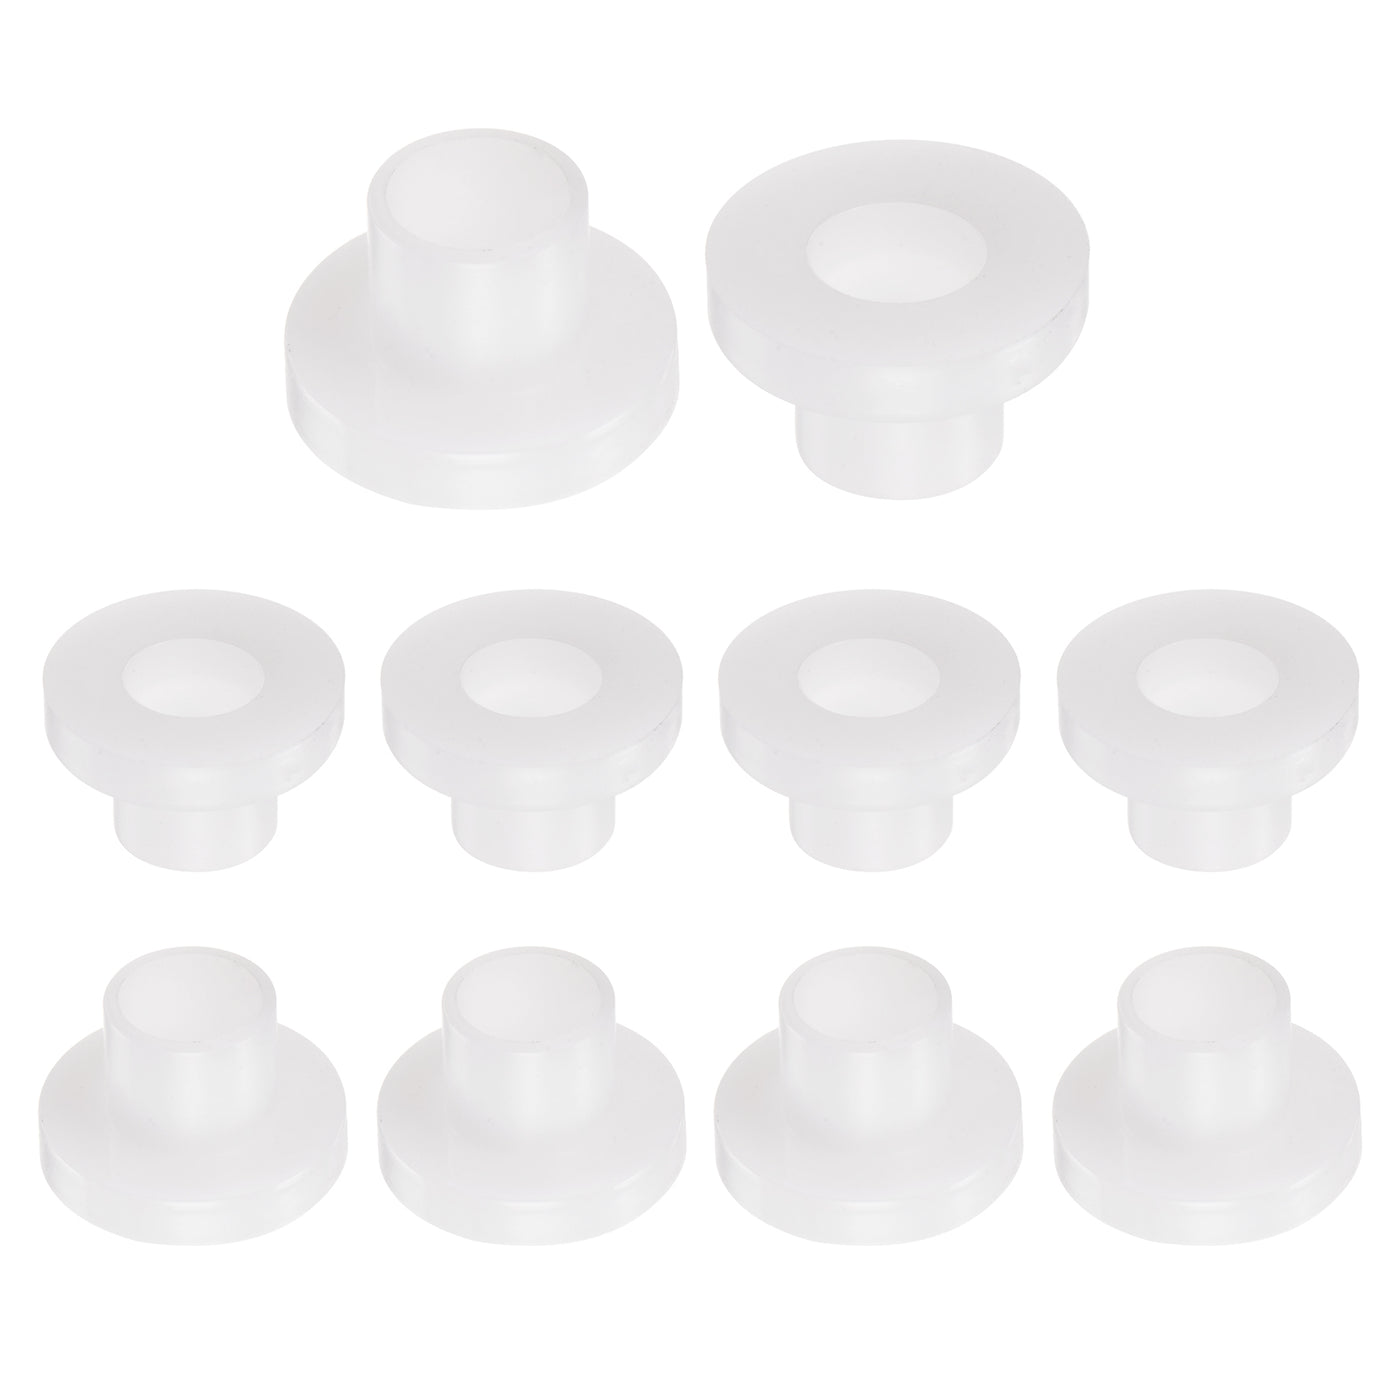 uxcell Uxcell 10pcs Flanged Sleeve Bearings 8mm ID 10mm OD 11mm Length Nylon Bushings, White